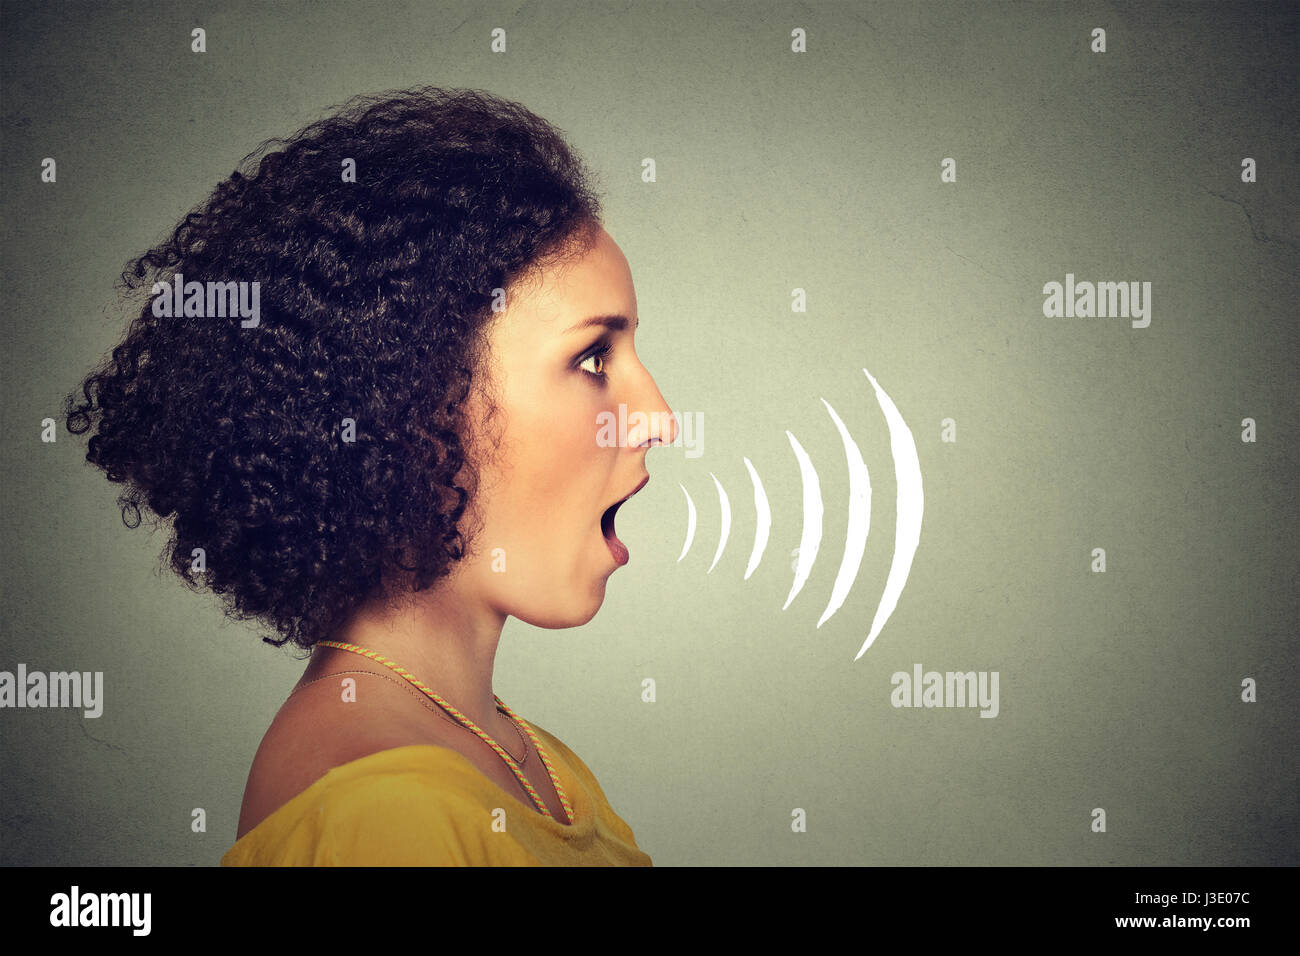 Side profile young woman talking with sound waves coming out of her mouth isolated on grey wall background. Human face expressions Stock Photo